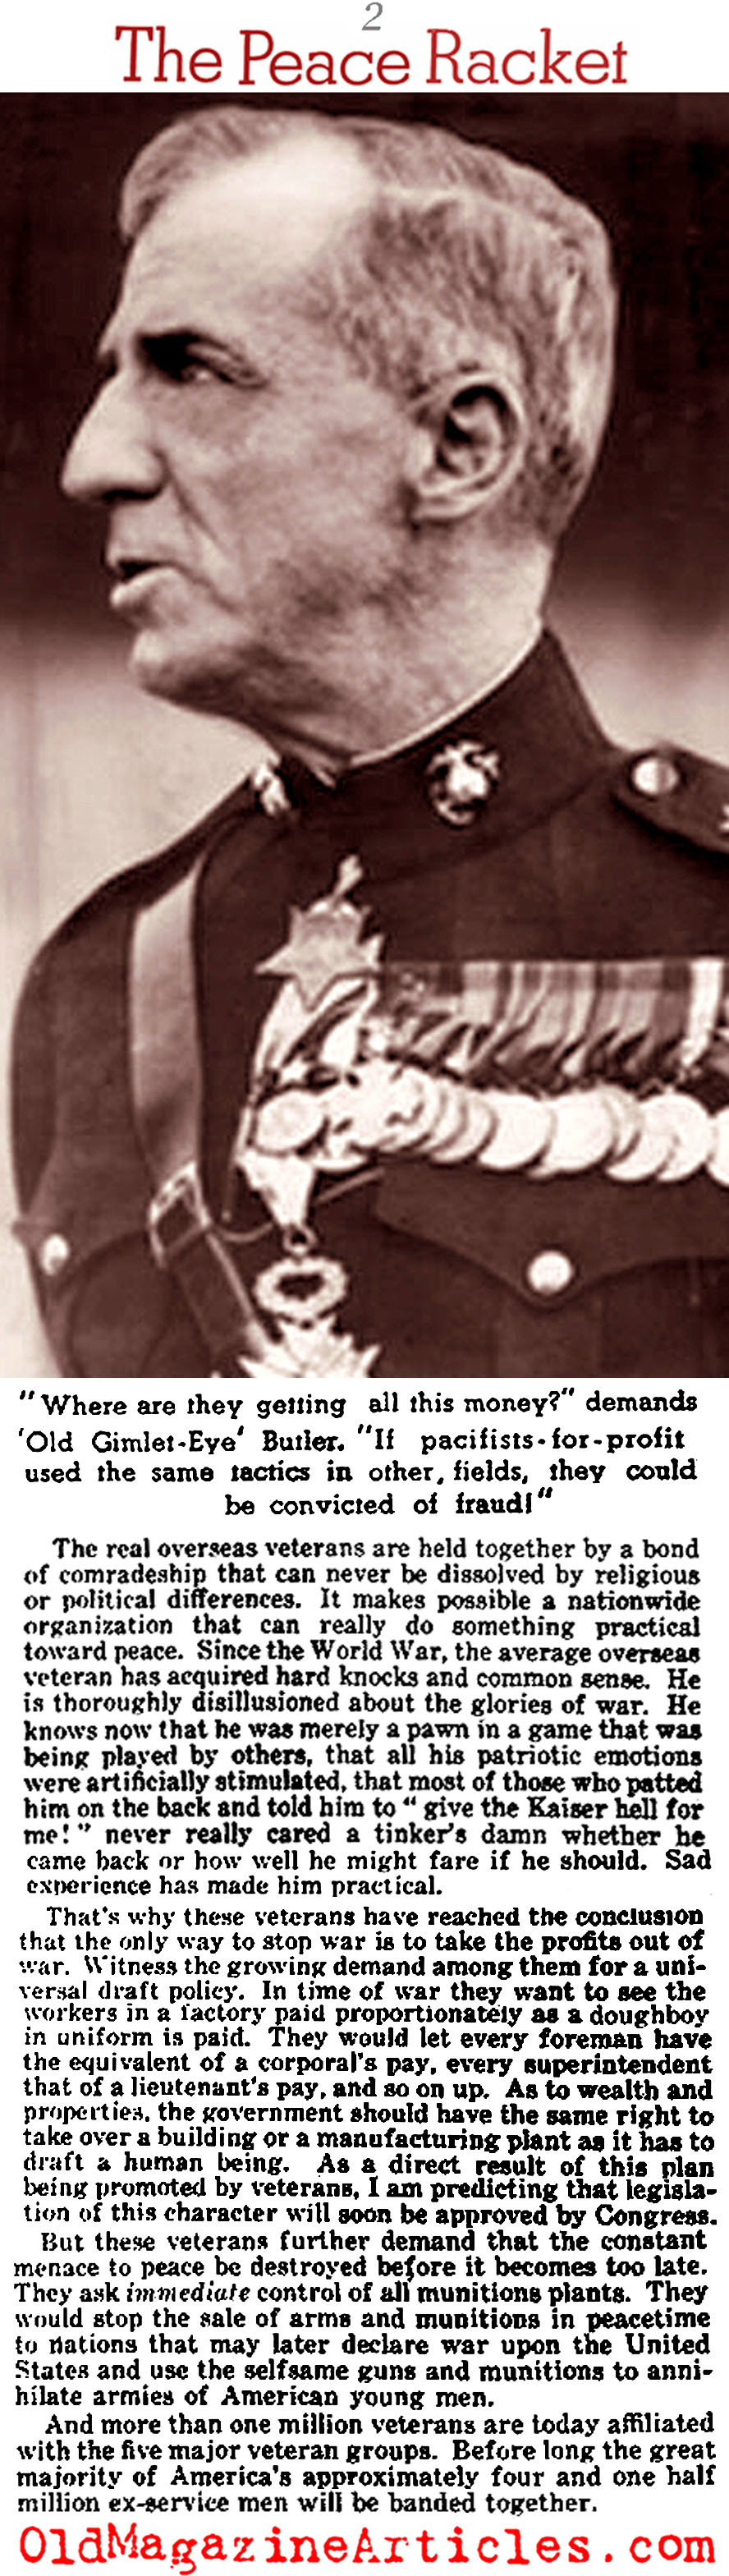 General Smedley Butler on Peace (Liberty Magazine, 1936)